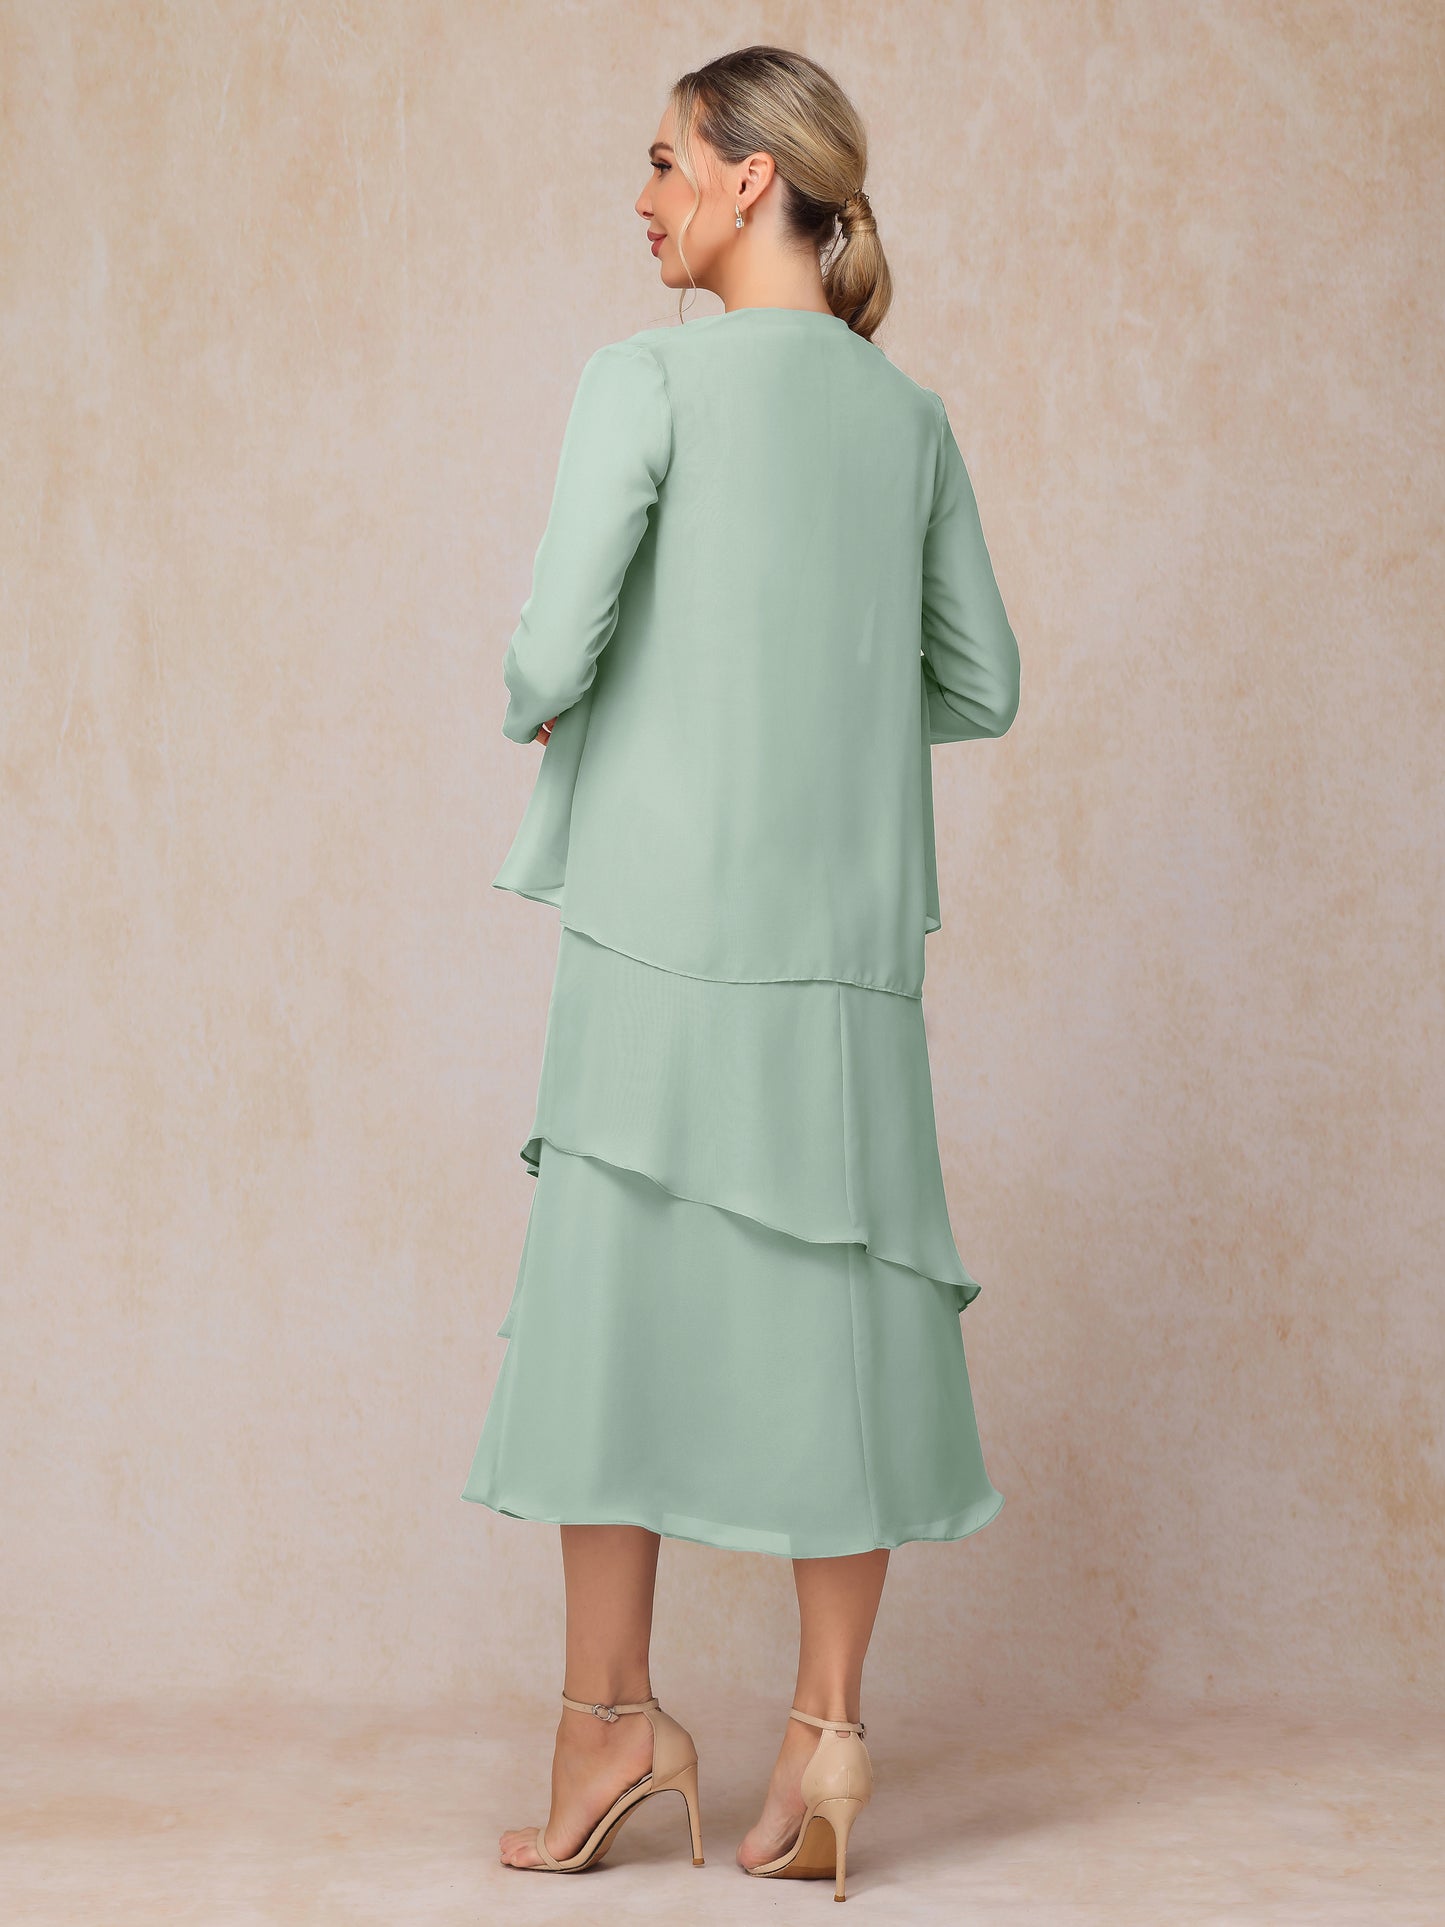 2 Pieces Tea Length Long Sleeves Chiffon Mother Of The Bride Dress